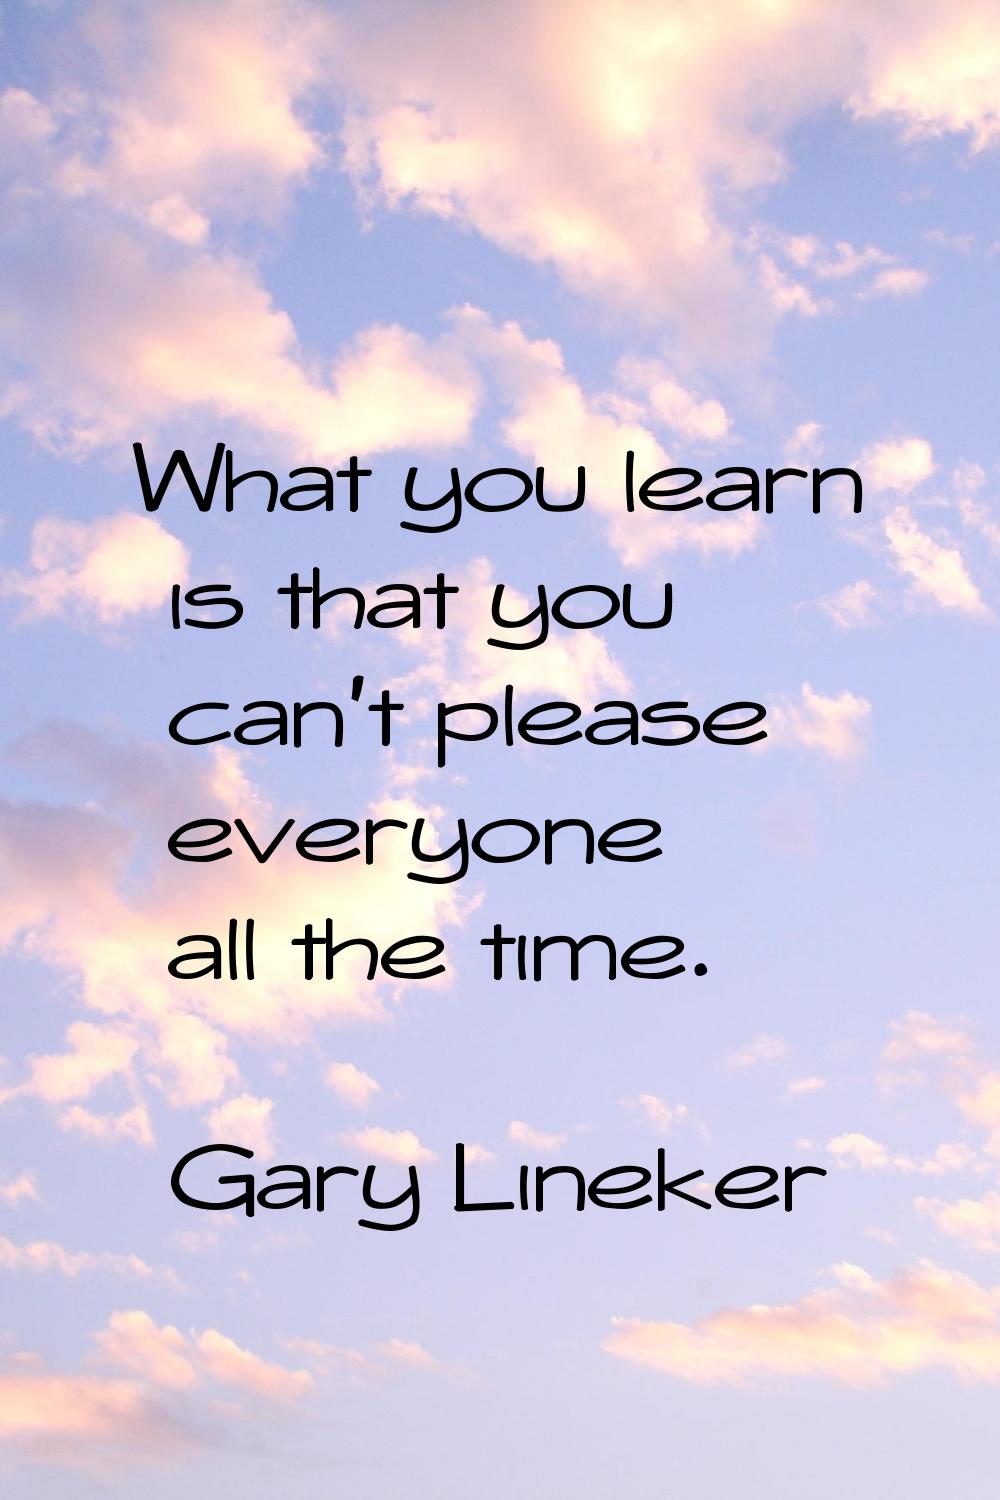 What you learn is that you can't please everyone all the time.